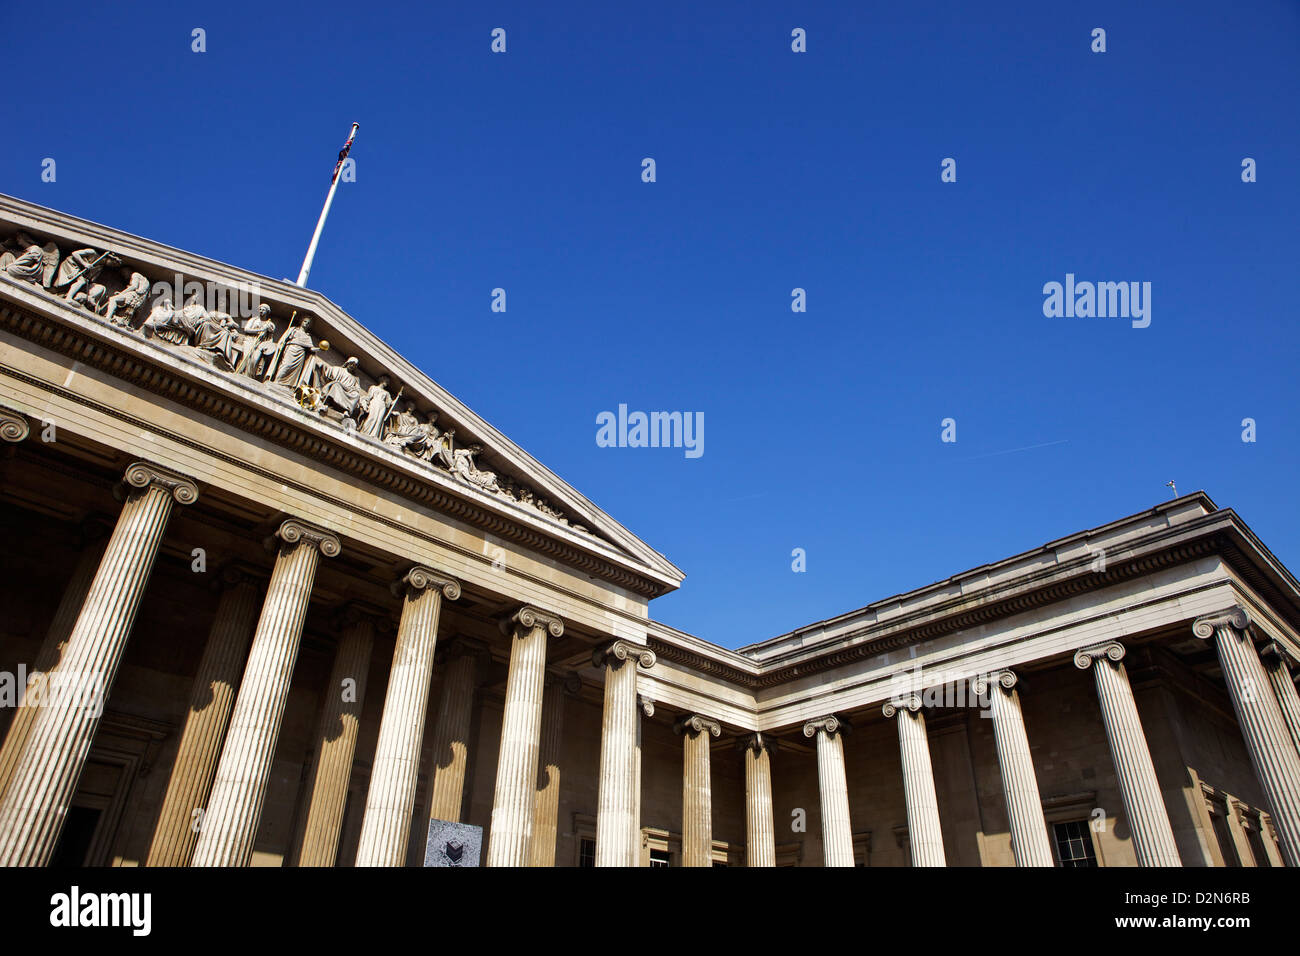 The British Museum, Great Russell Street, London, England, United Kingdom, Europe Stock Photo